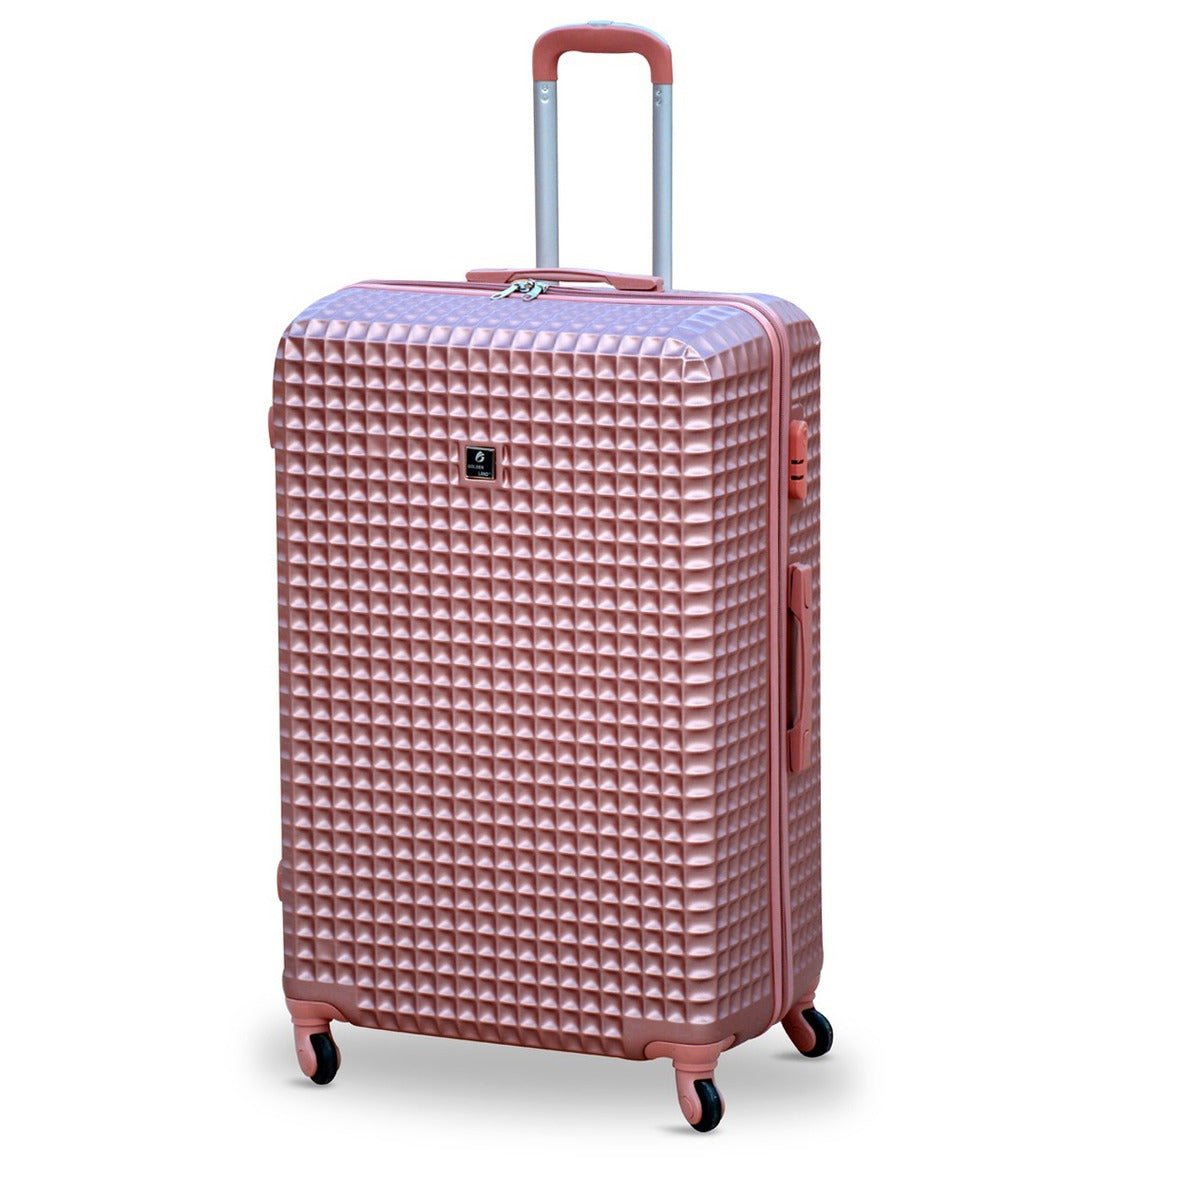 4 Piece Set 7" 20" 24" 28 Inches Rose Gold Colour Square Cut ABS Luggage Lightweight Hard Case Trolley Bag Zaappy.com